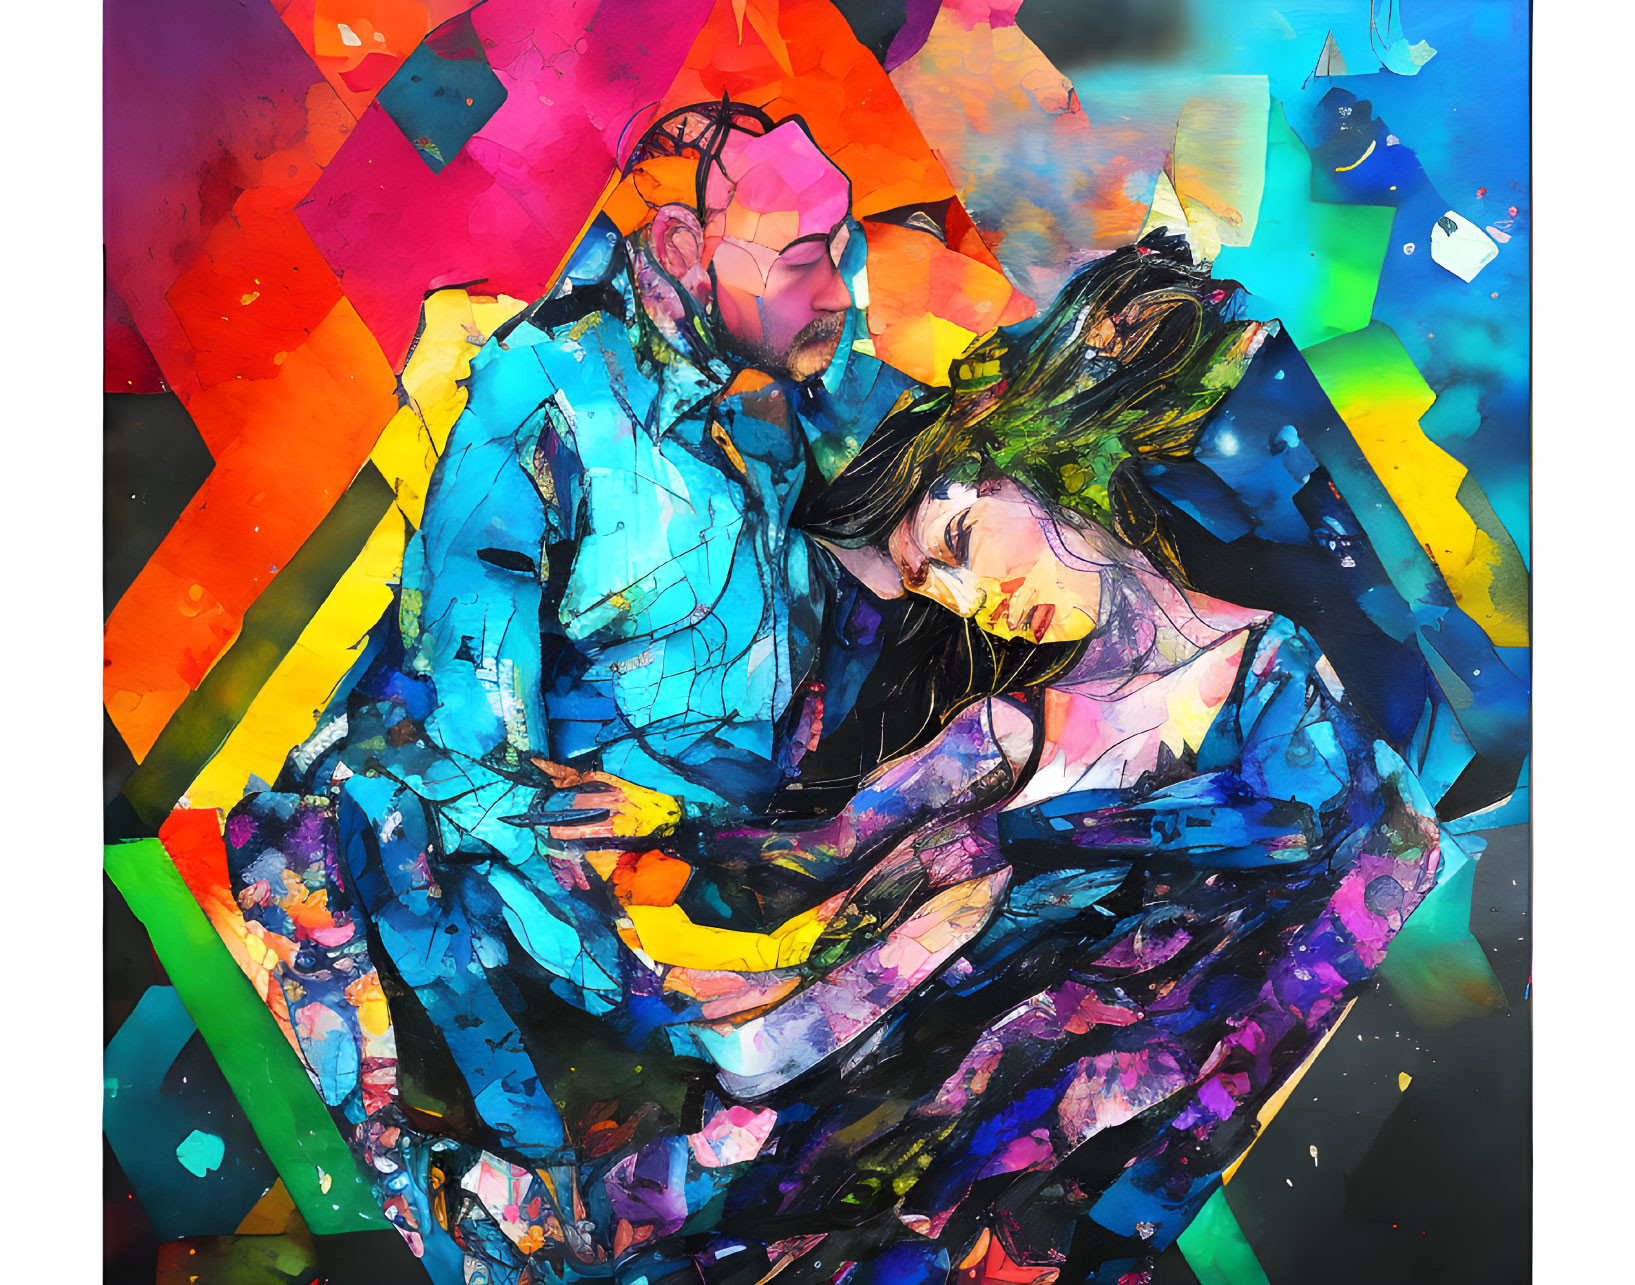 Abstract painting: Stylized man and woman embrace with vibrant colors